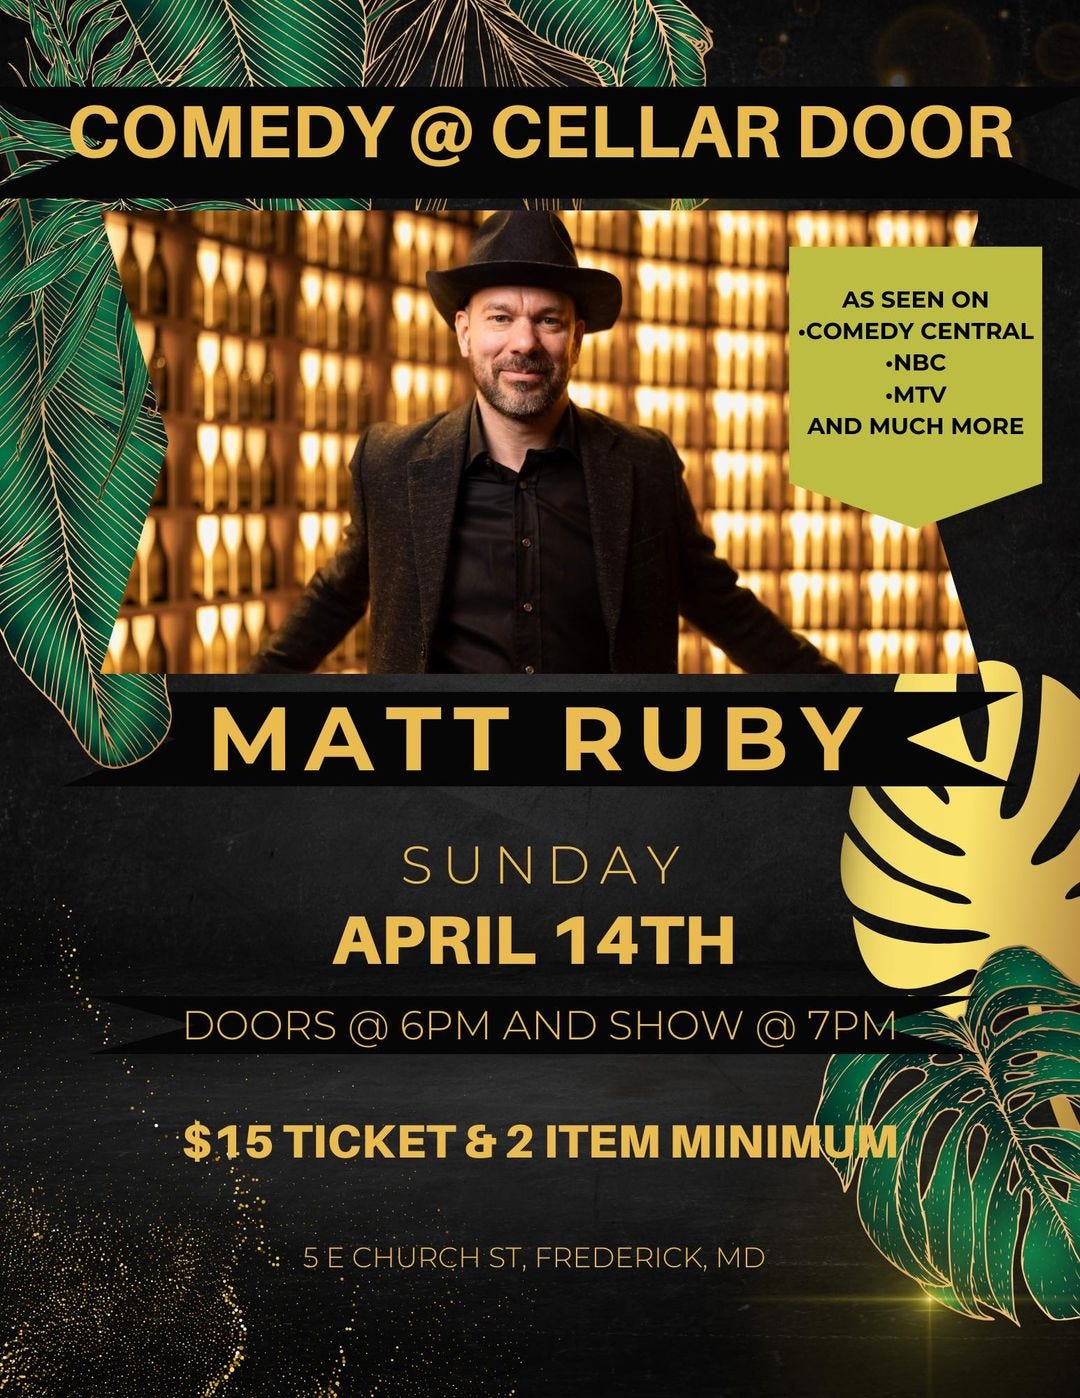 May be an image of 1 person and text that says 'COMEDY @ CELLAR DOOR MI .. AS SEEN ON .COMEDY CENTRAL •NBC mm AND MUCHMORE MUCH MORE ·MTV MATT RUBY SUNDAY APRIL 14TH DOORS @ 6PM AND SHOW 7PM- $15 TICKET & 2 ITEM MINIMUM ST,FRE RICK, ERICK,MD MD'